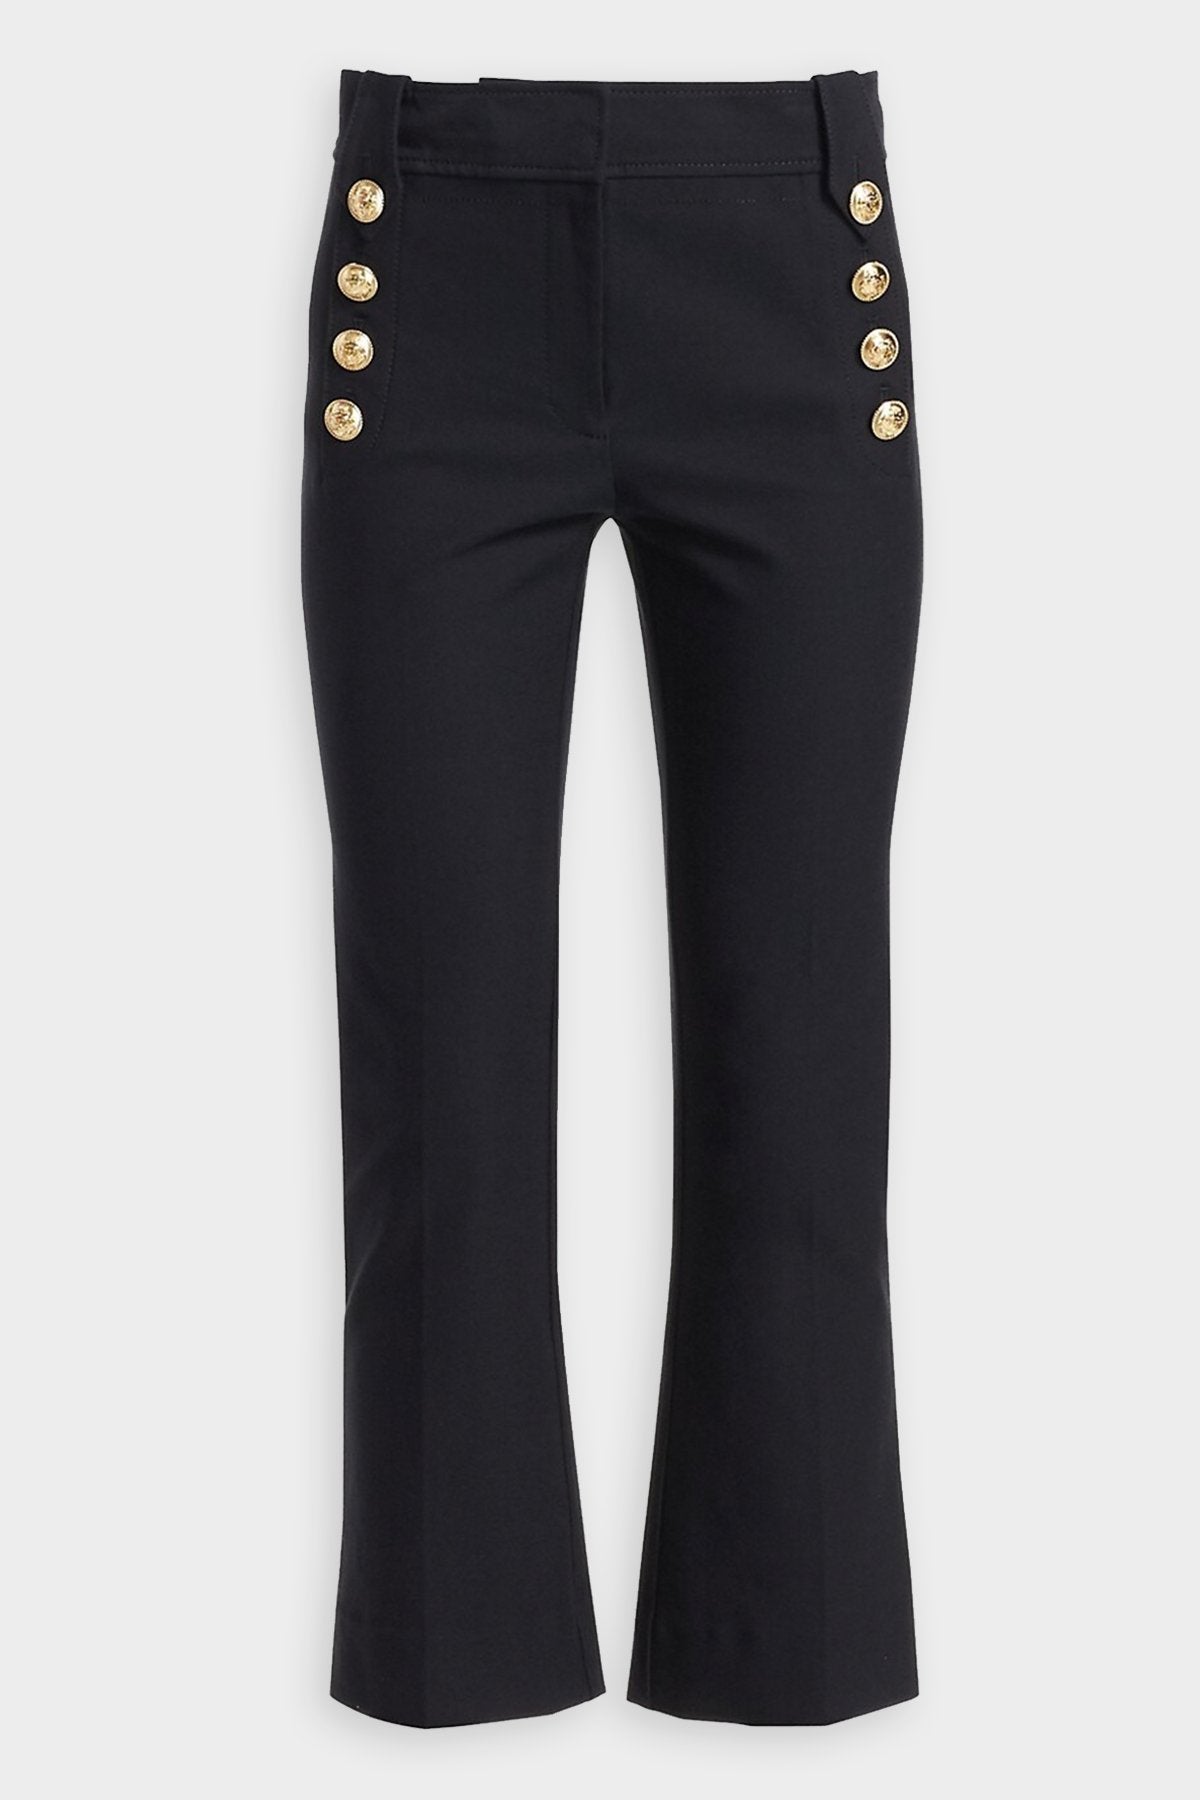 Robertson Cropped Flare Trouser with Sailor Buttons in Midnight - shop-olivia.com